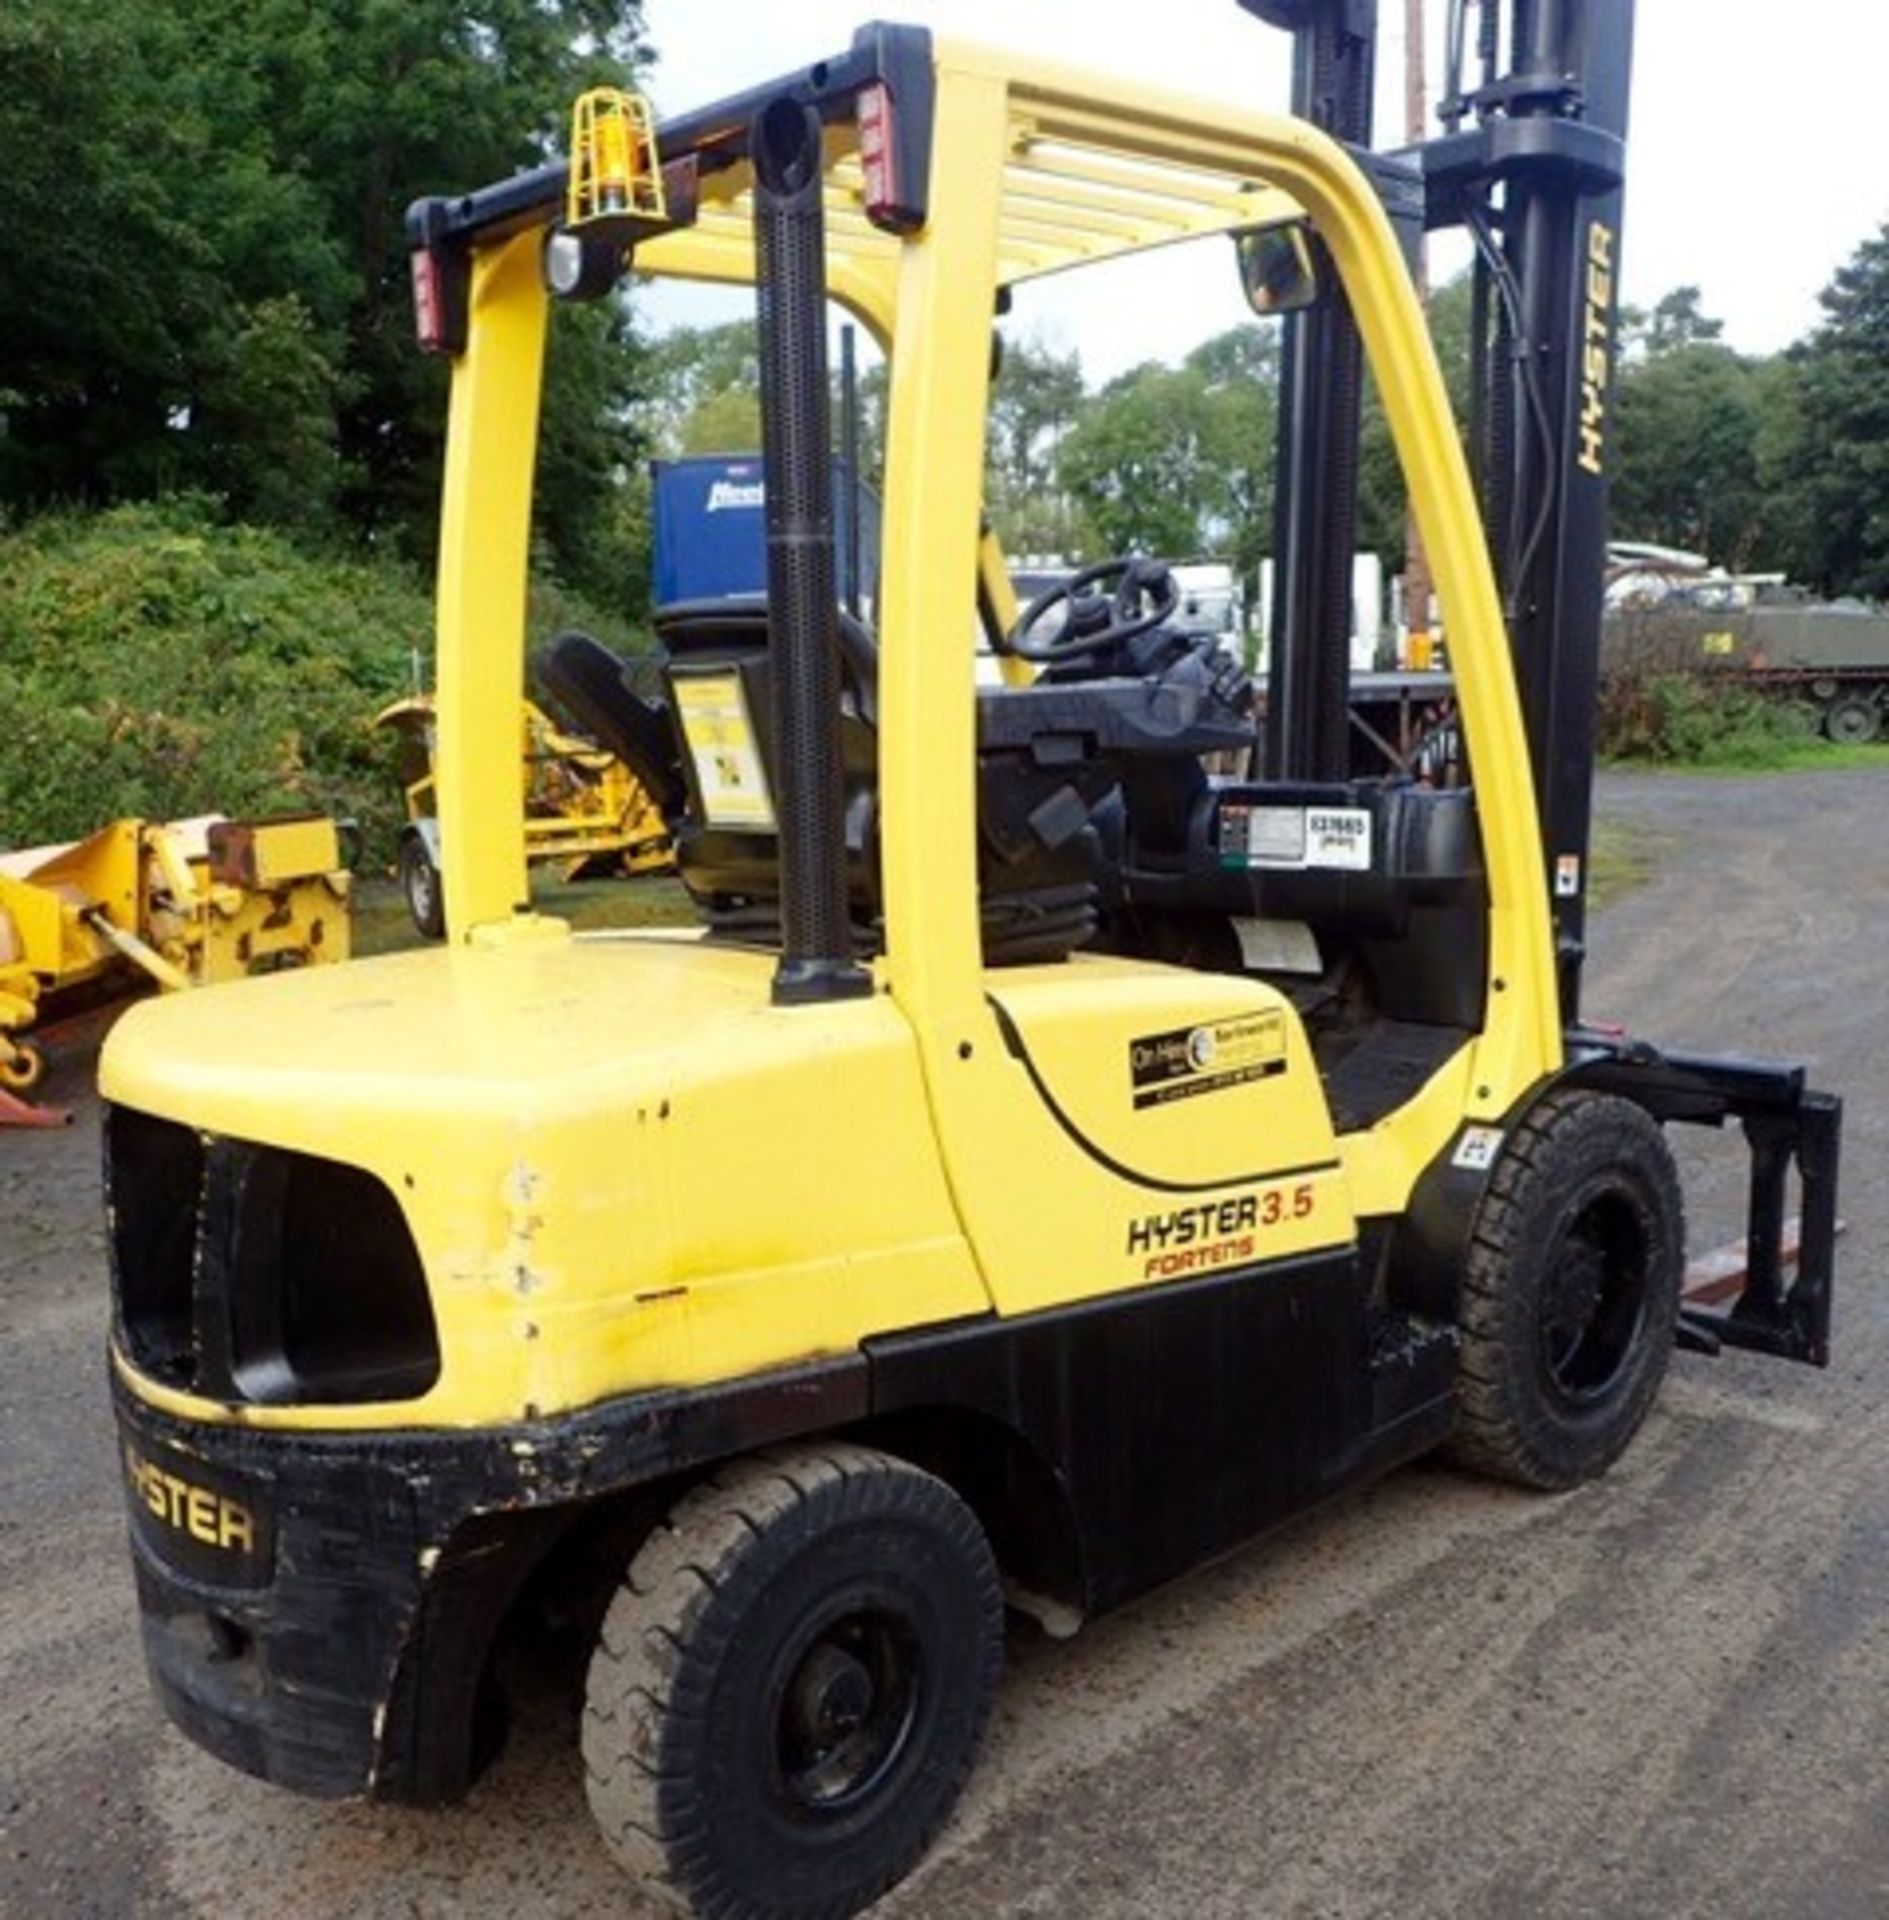 Hyster H3.5 3.5 tonne diesel driven fork lift truck Year: 2012 S/N: L177B36176K Recorded Hours: - Image 3 of 10